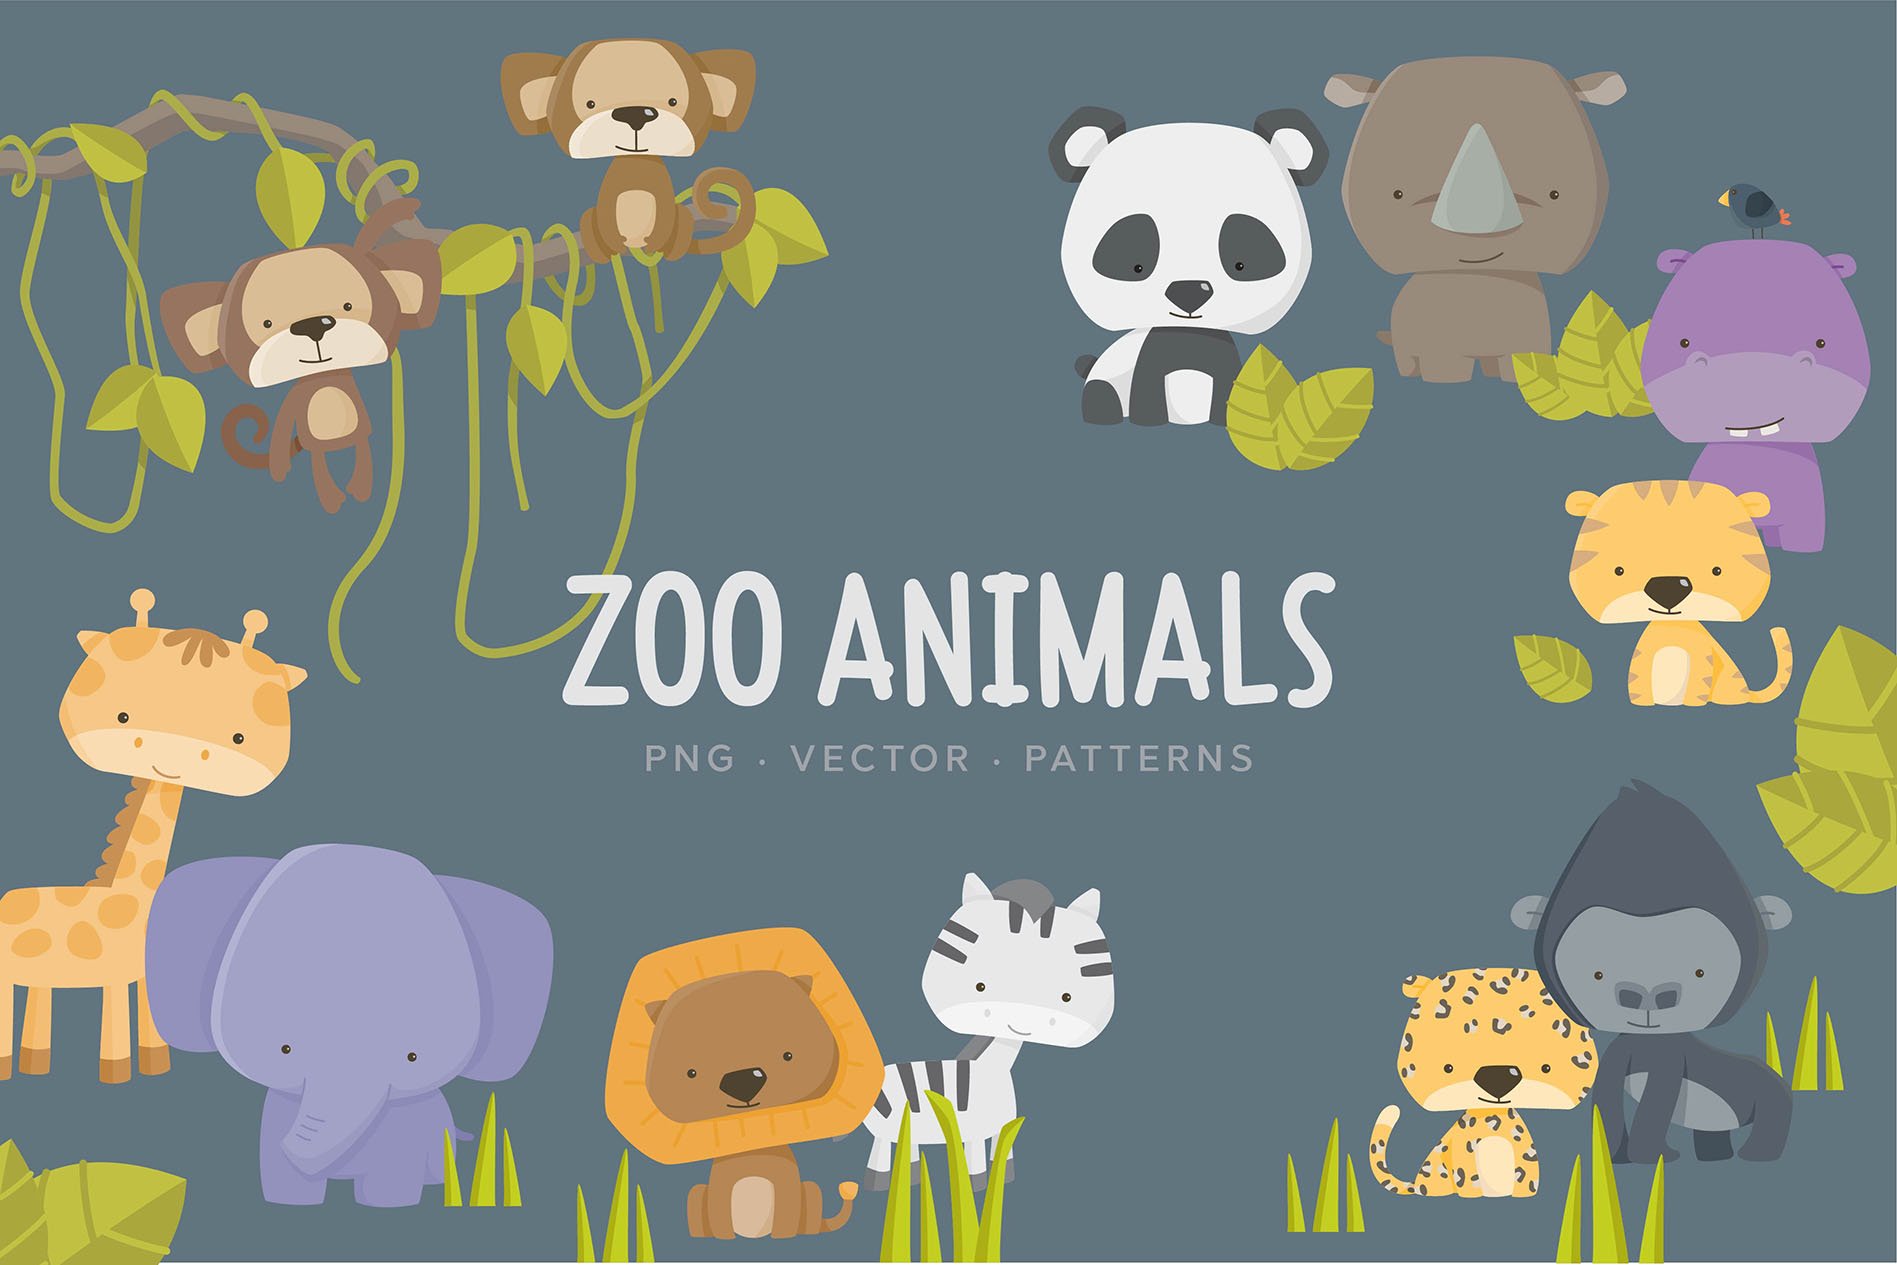 Little Zoo Animals & Patterns cover image.